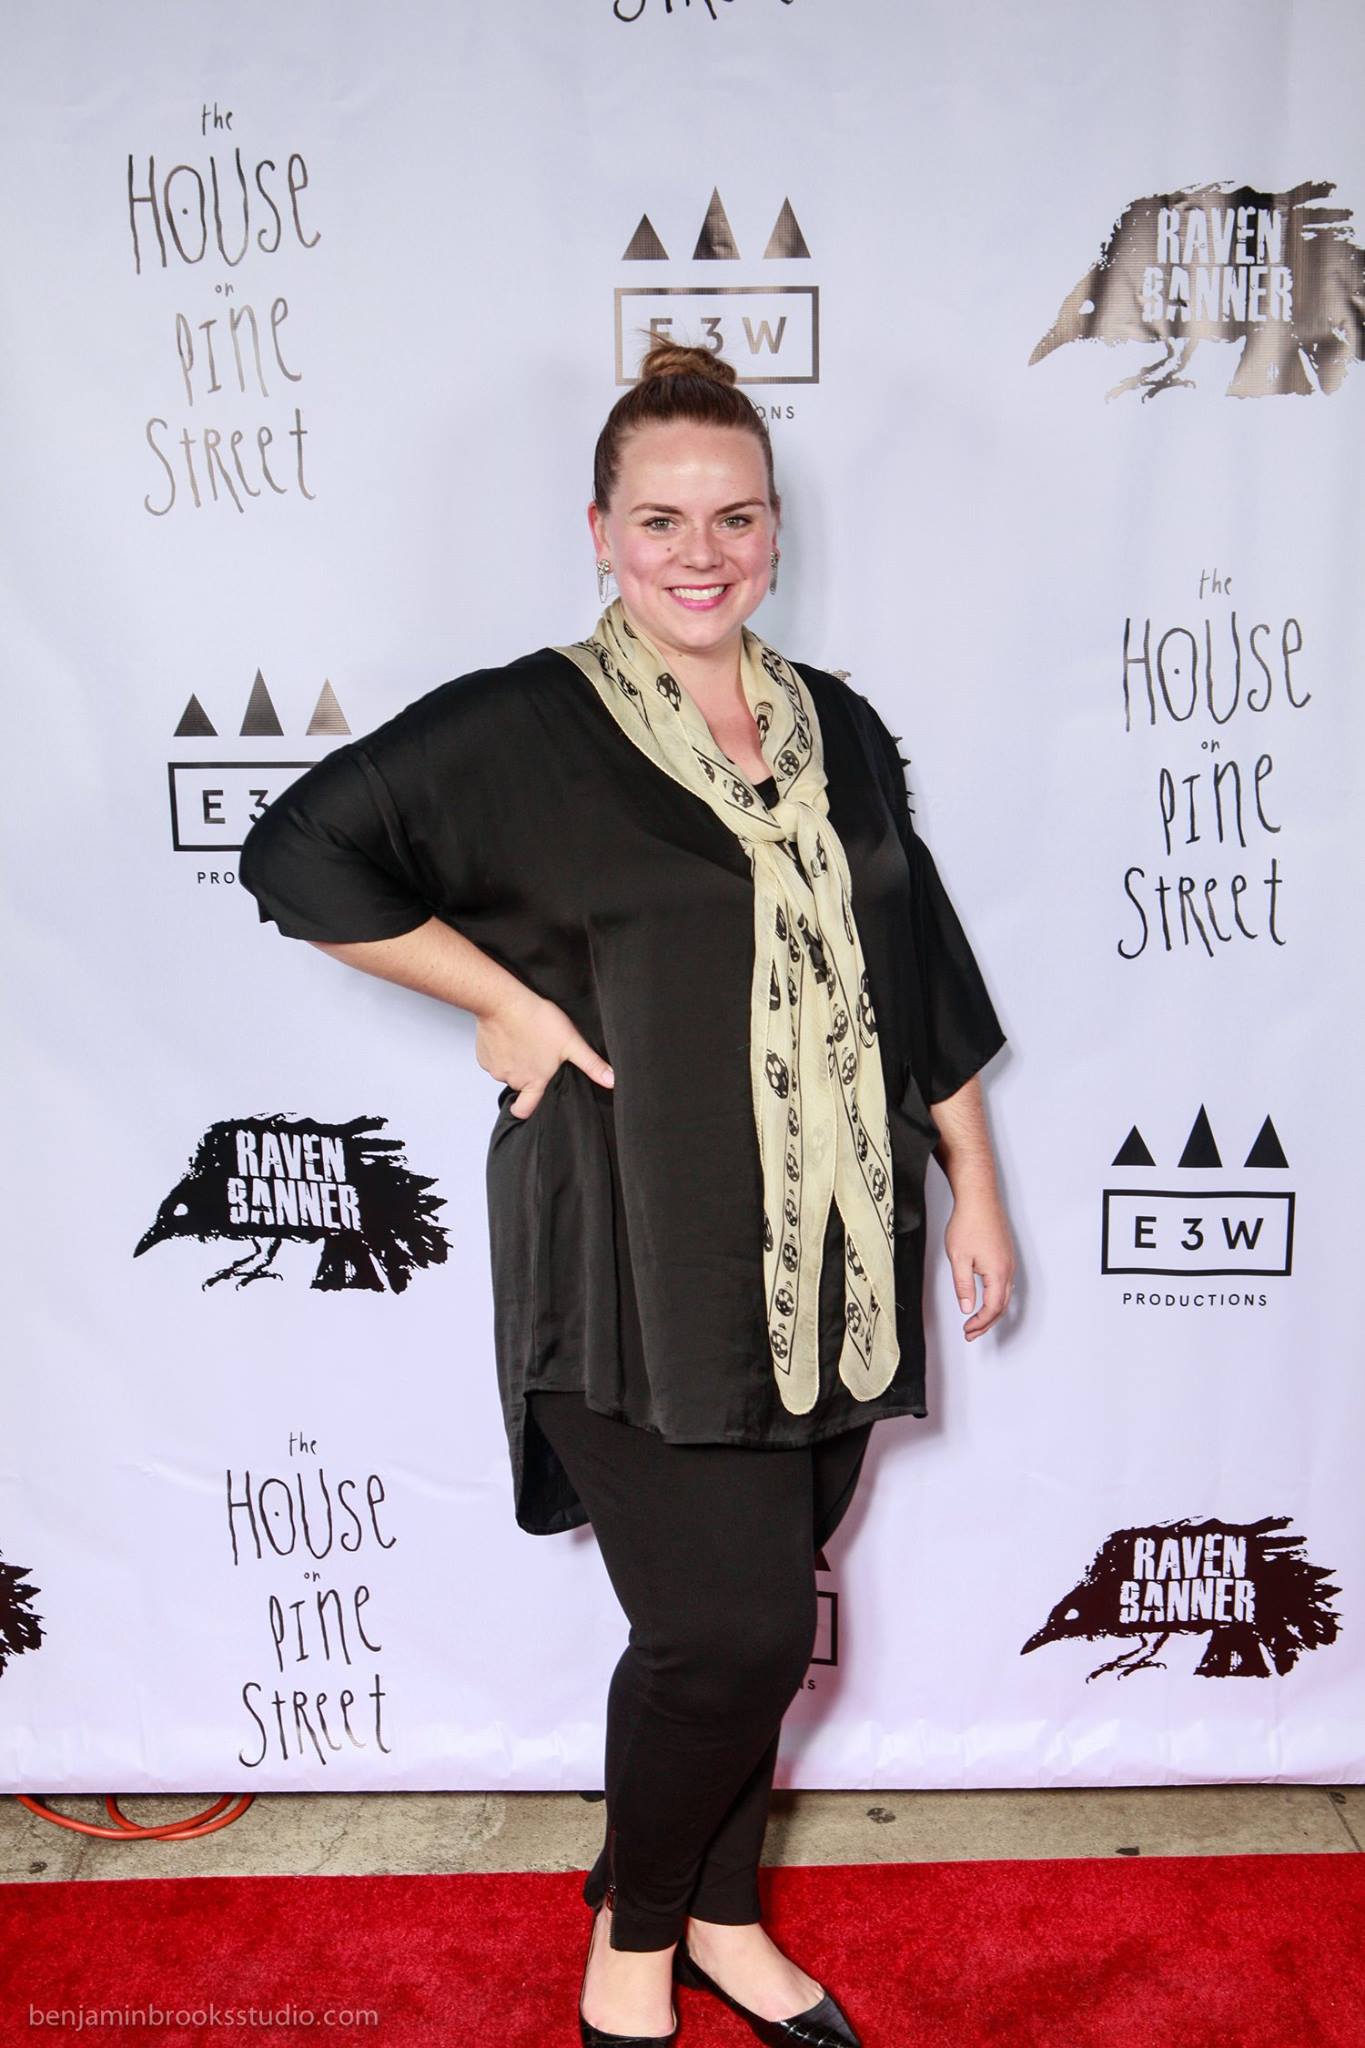 Anna Megan Becker attends a screening of The House on Pine Street in Beverly Hills.